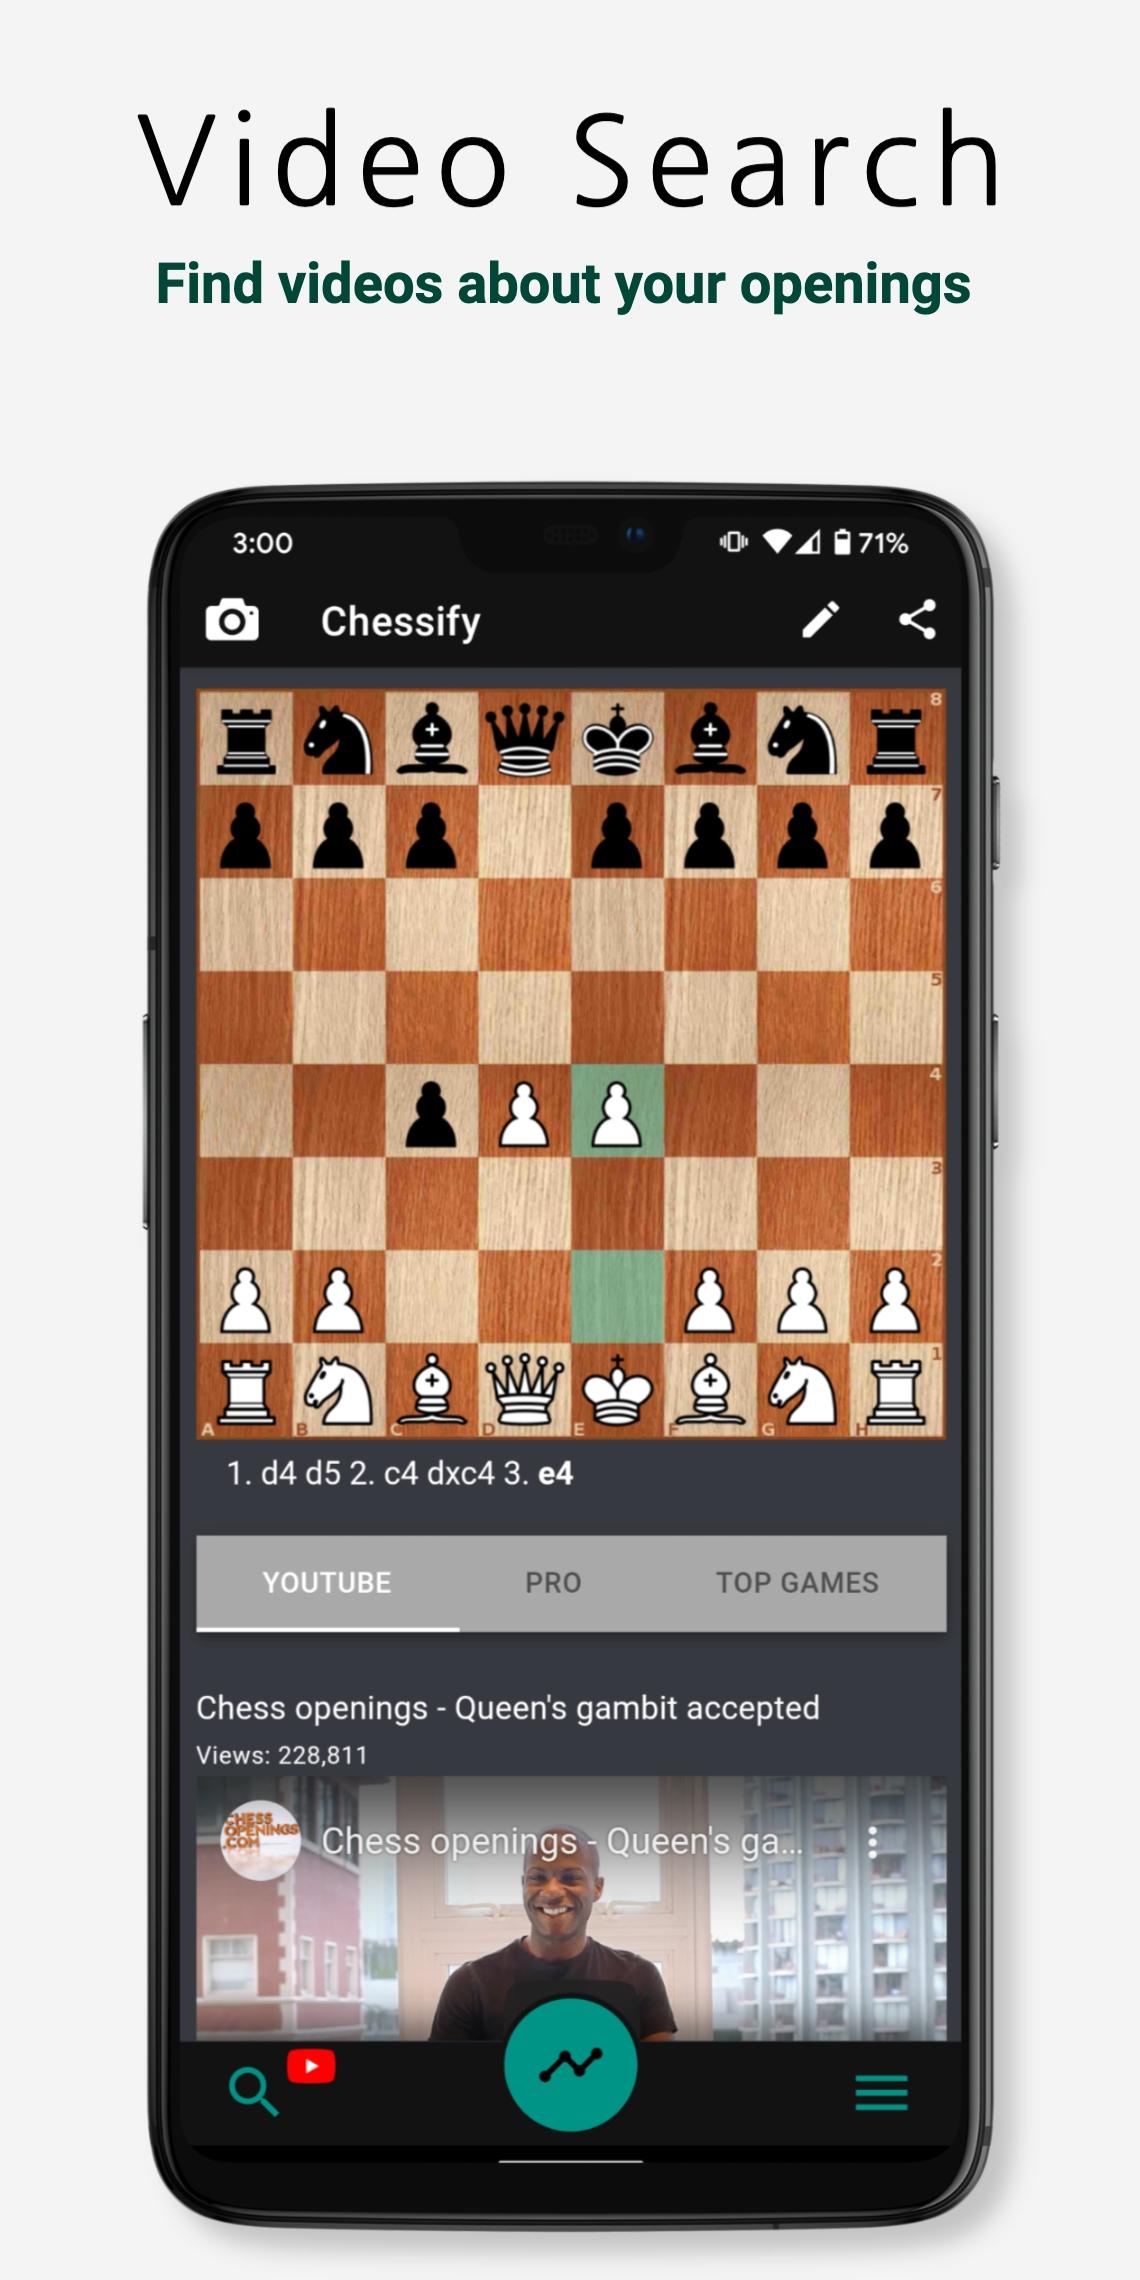 FIDE Online Arena APK (Android Game) - Free Download